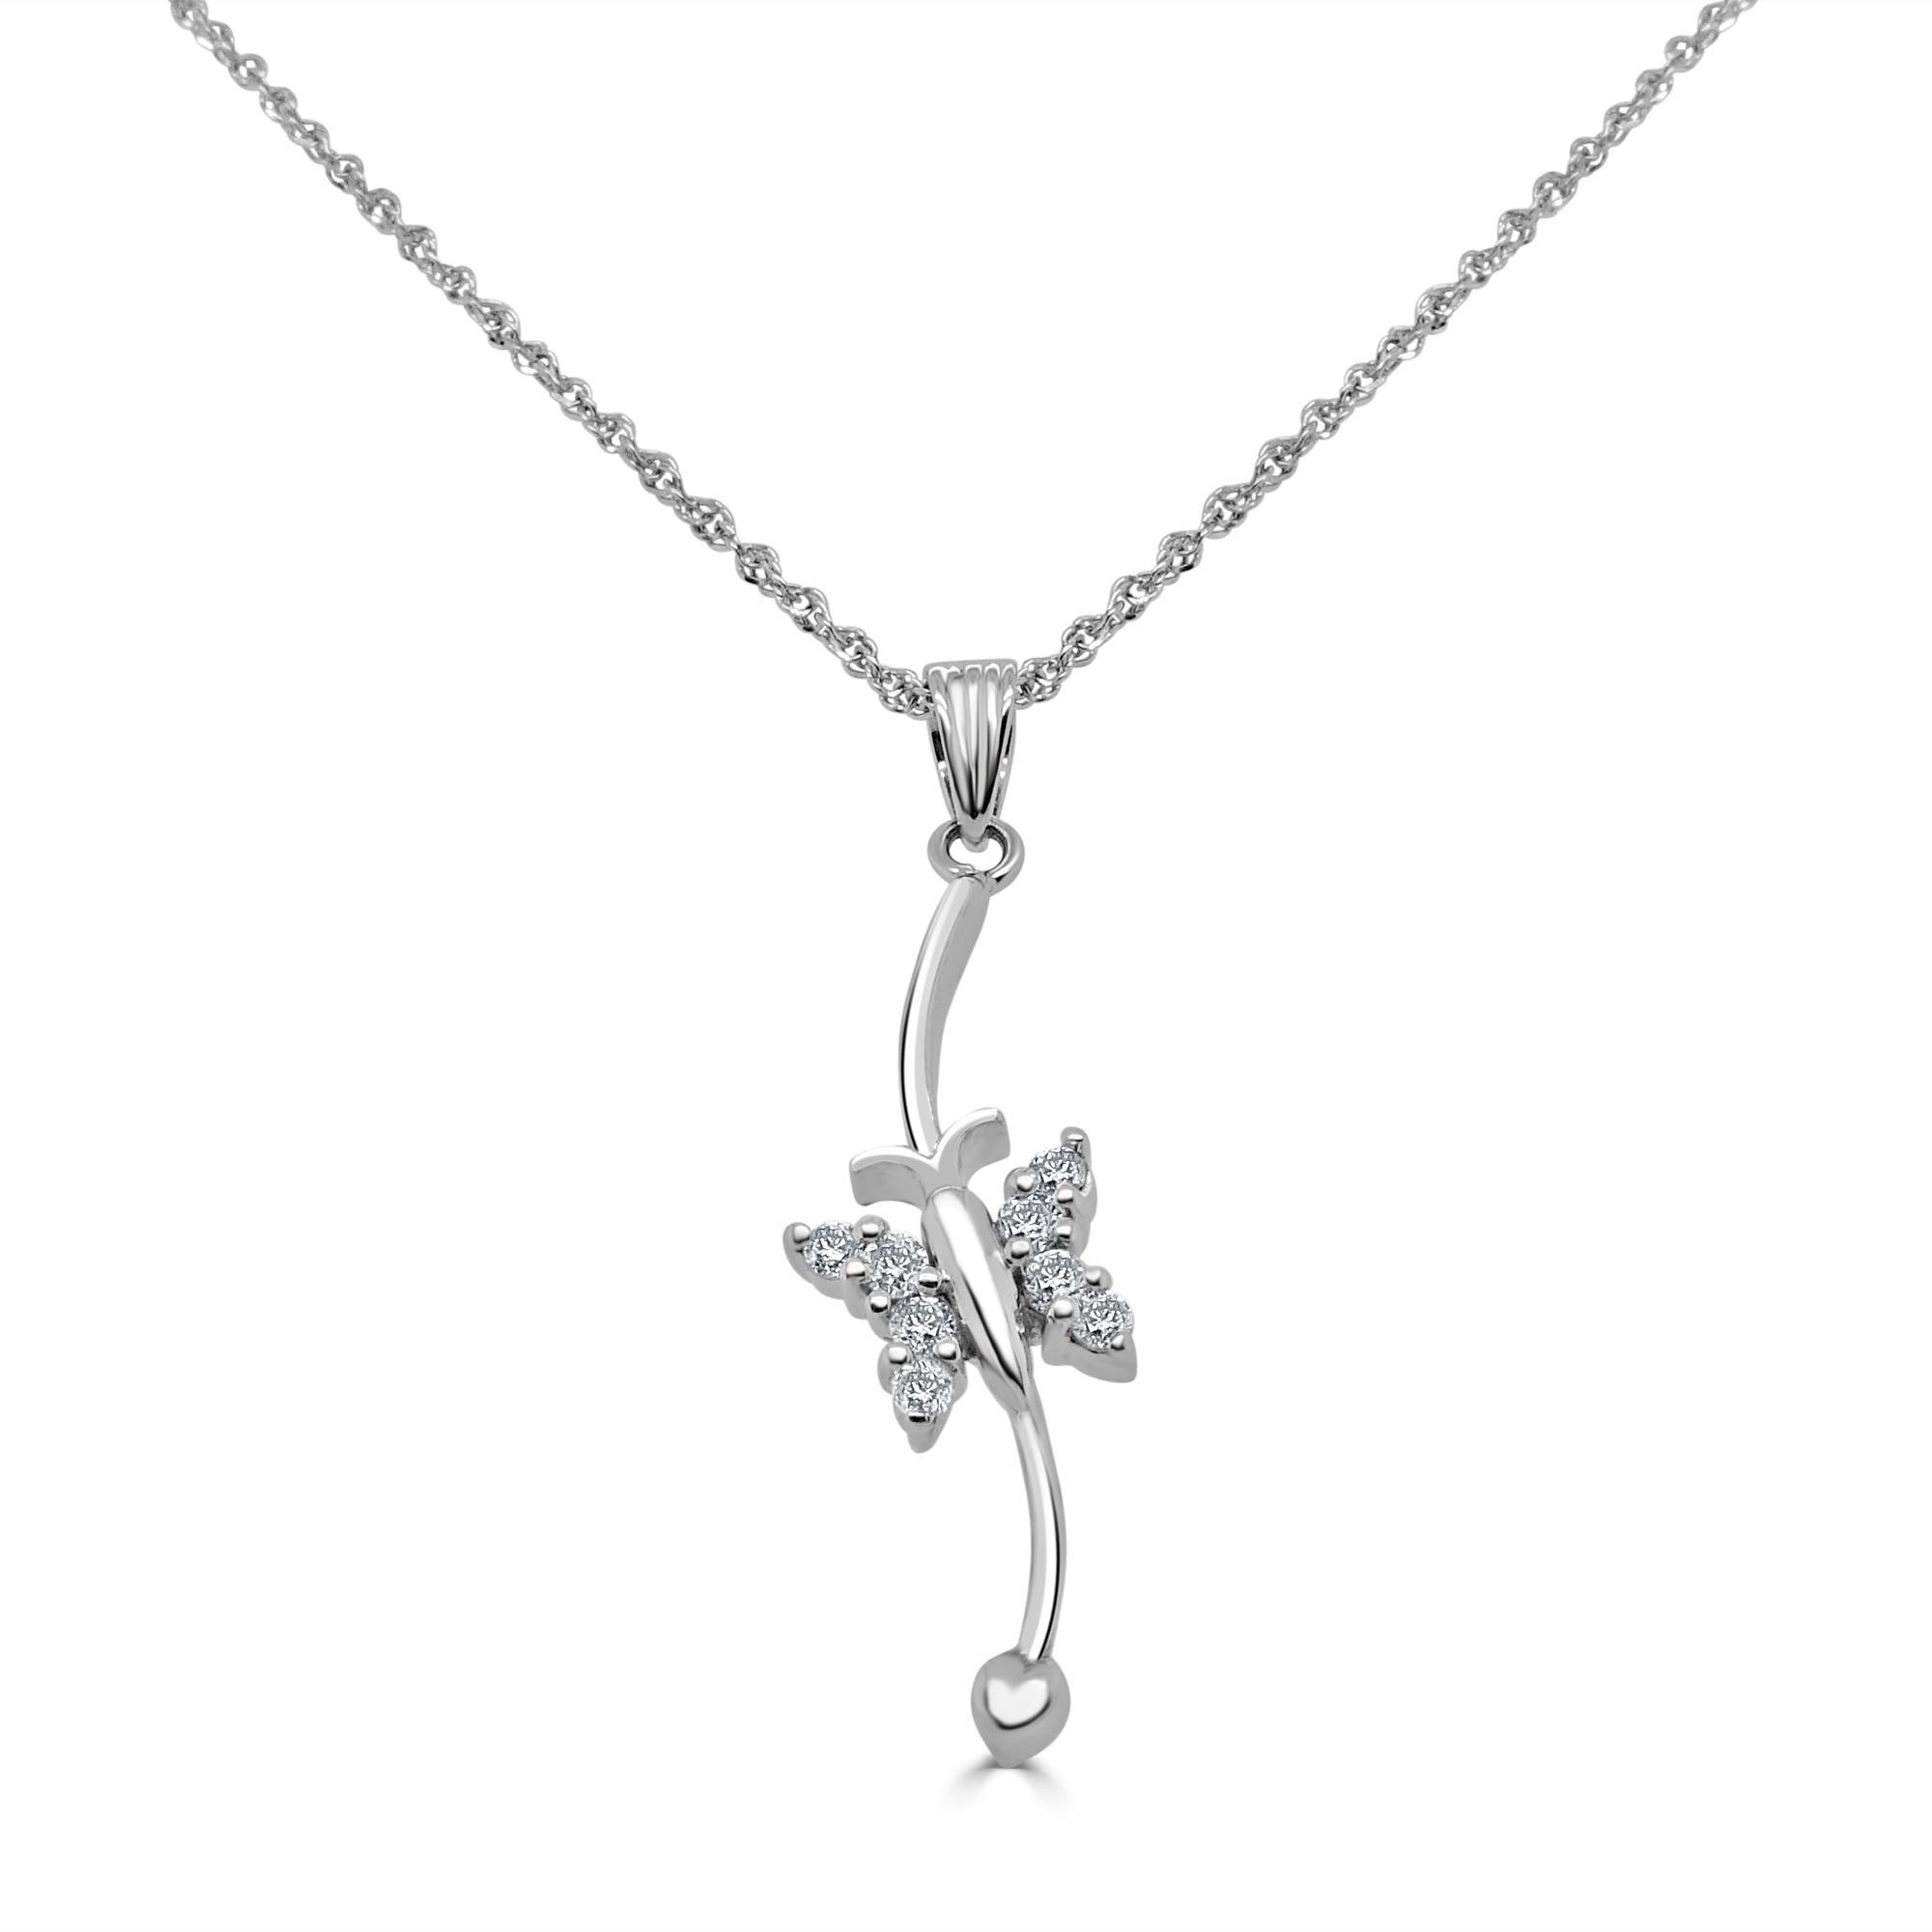 Beautiful 18K white gold butterfly pendant with 0.11 ct of round diamonds accenting the butterfly wings perfectly on a 18k white gold 16 inch necklace.

Gold Purity: 18 Karat
Gold Type: White Gold
Stone Name: Diamond
Diamond Weight: 0.11